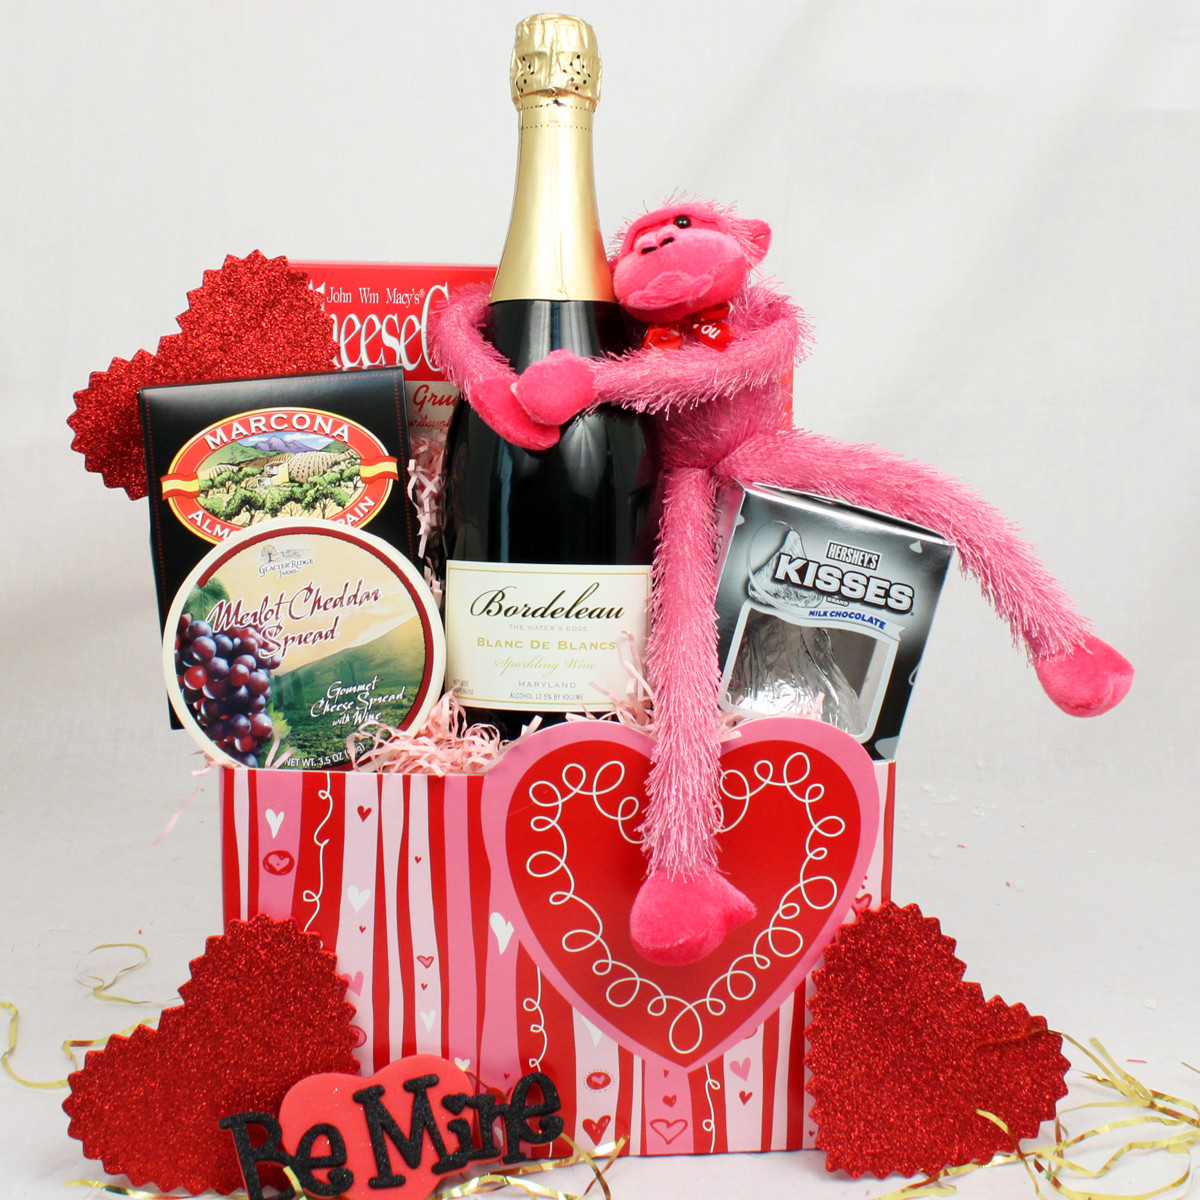 Clever Valentines Day Gifts
 Creative and Thoughtful Valentine’s Day Gifts for Her